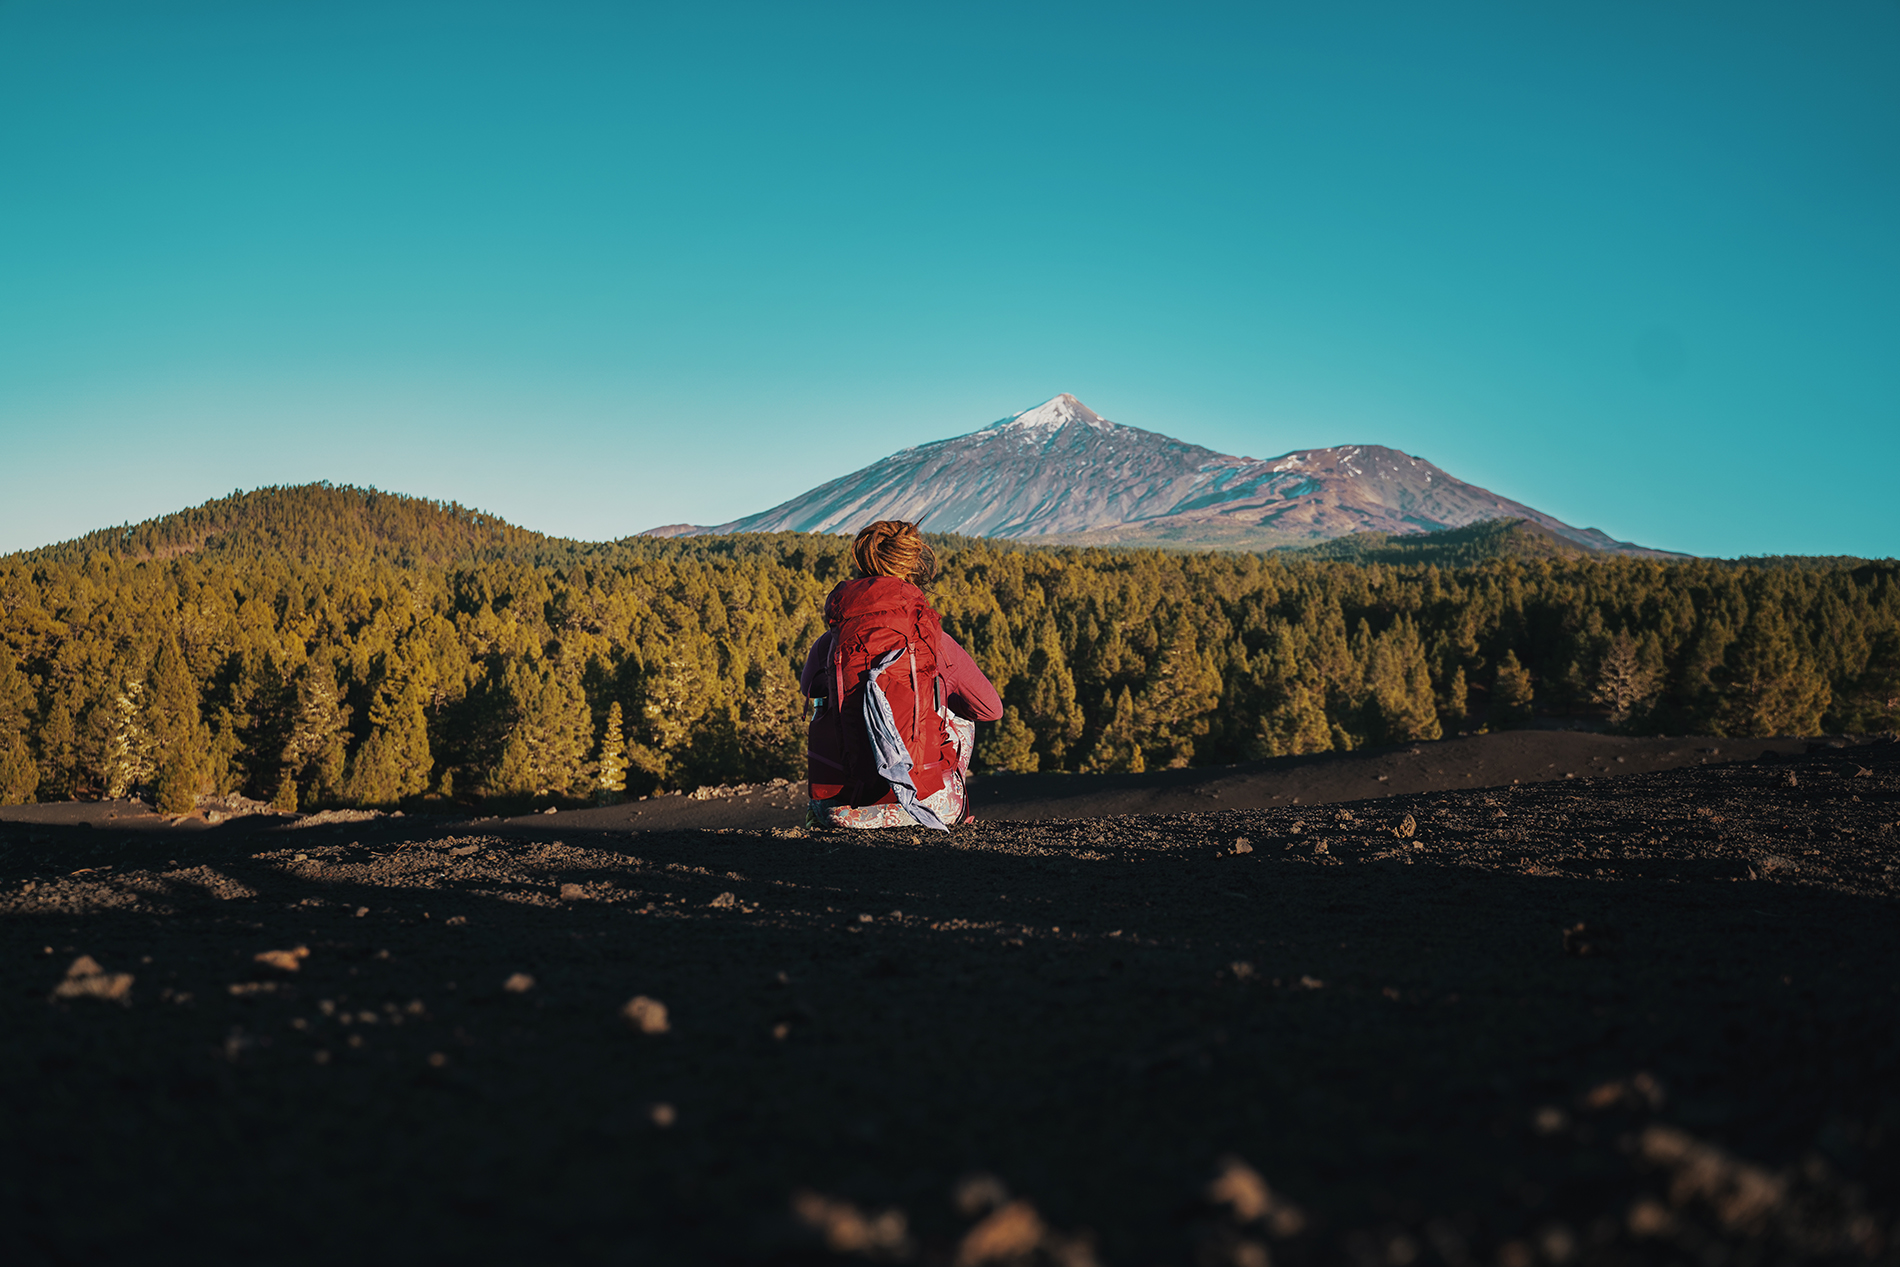 A backpacker resting in front of a volcanic mountain landscape.